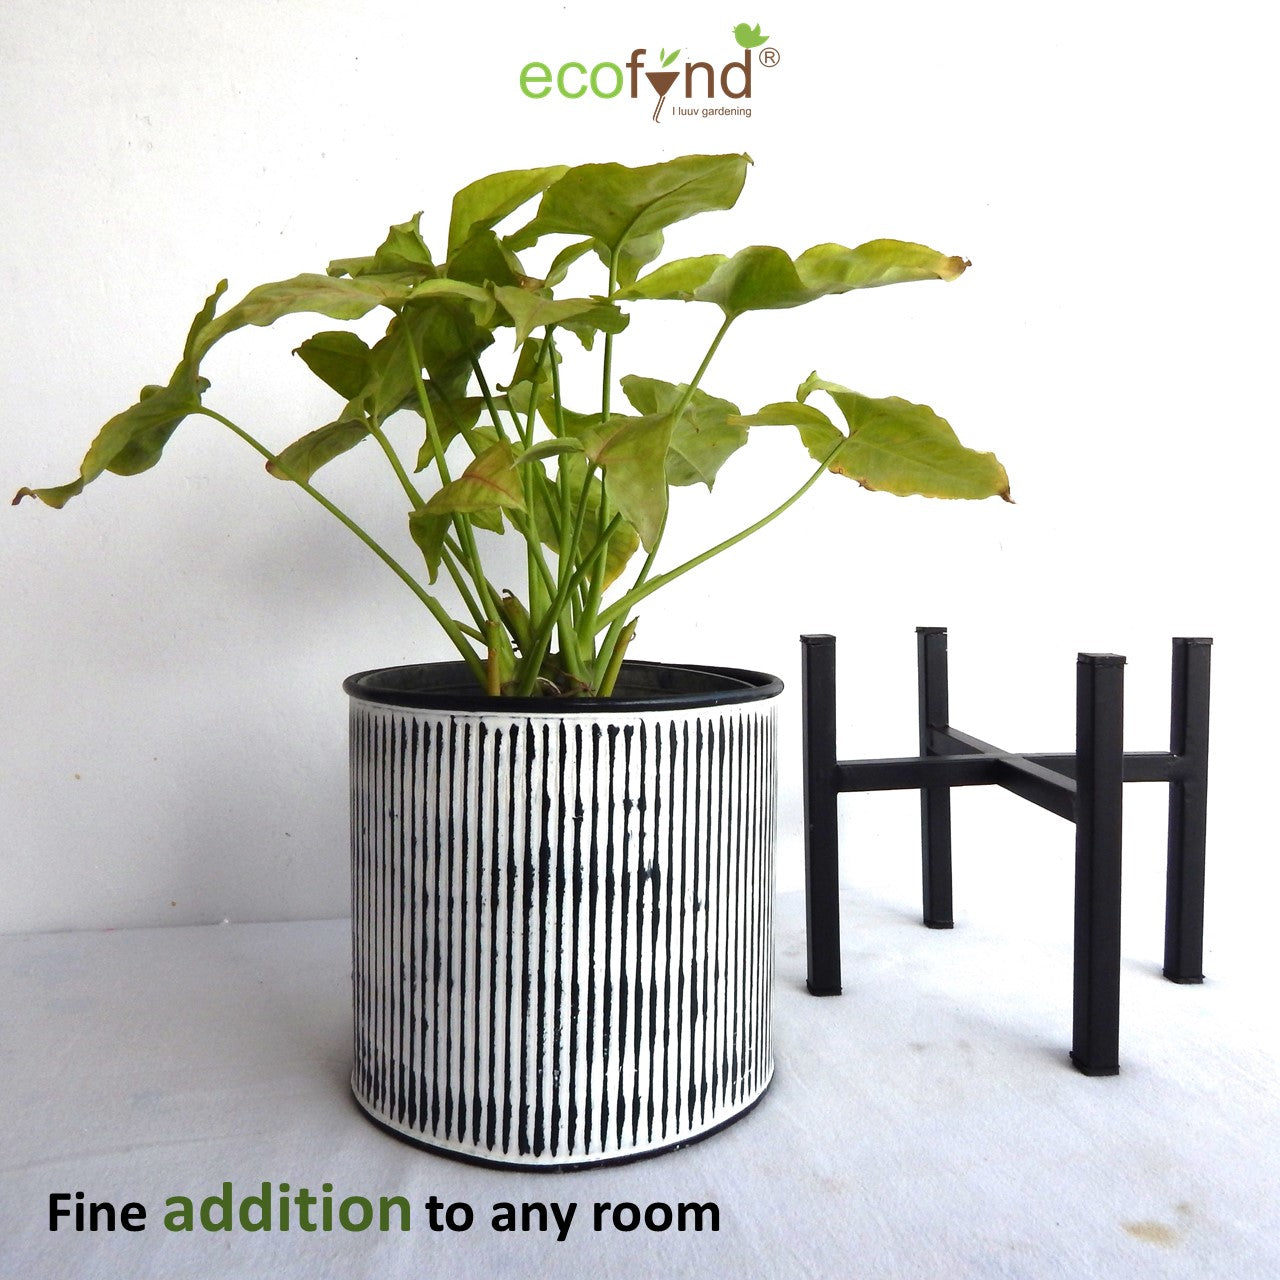 ecofynd 6 inches Jeff Metal Vintage Plant Pot with Stand Planter freeshipping - Ecofynd